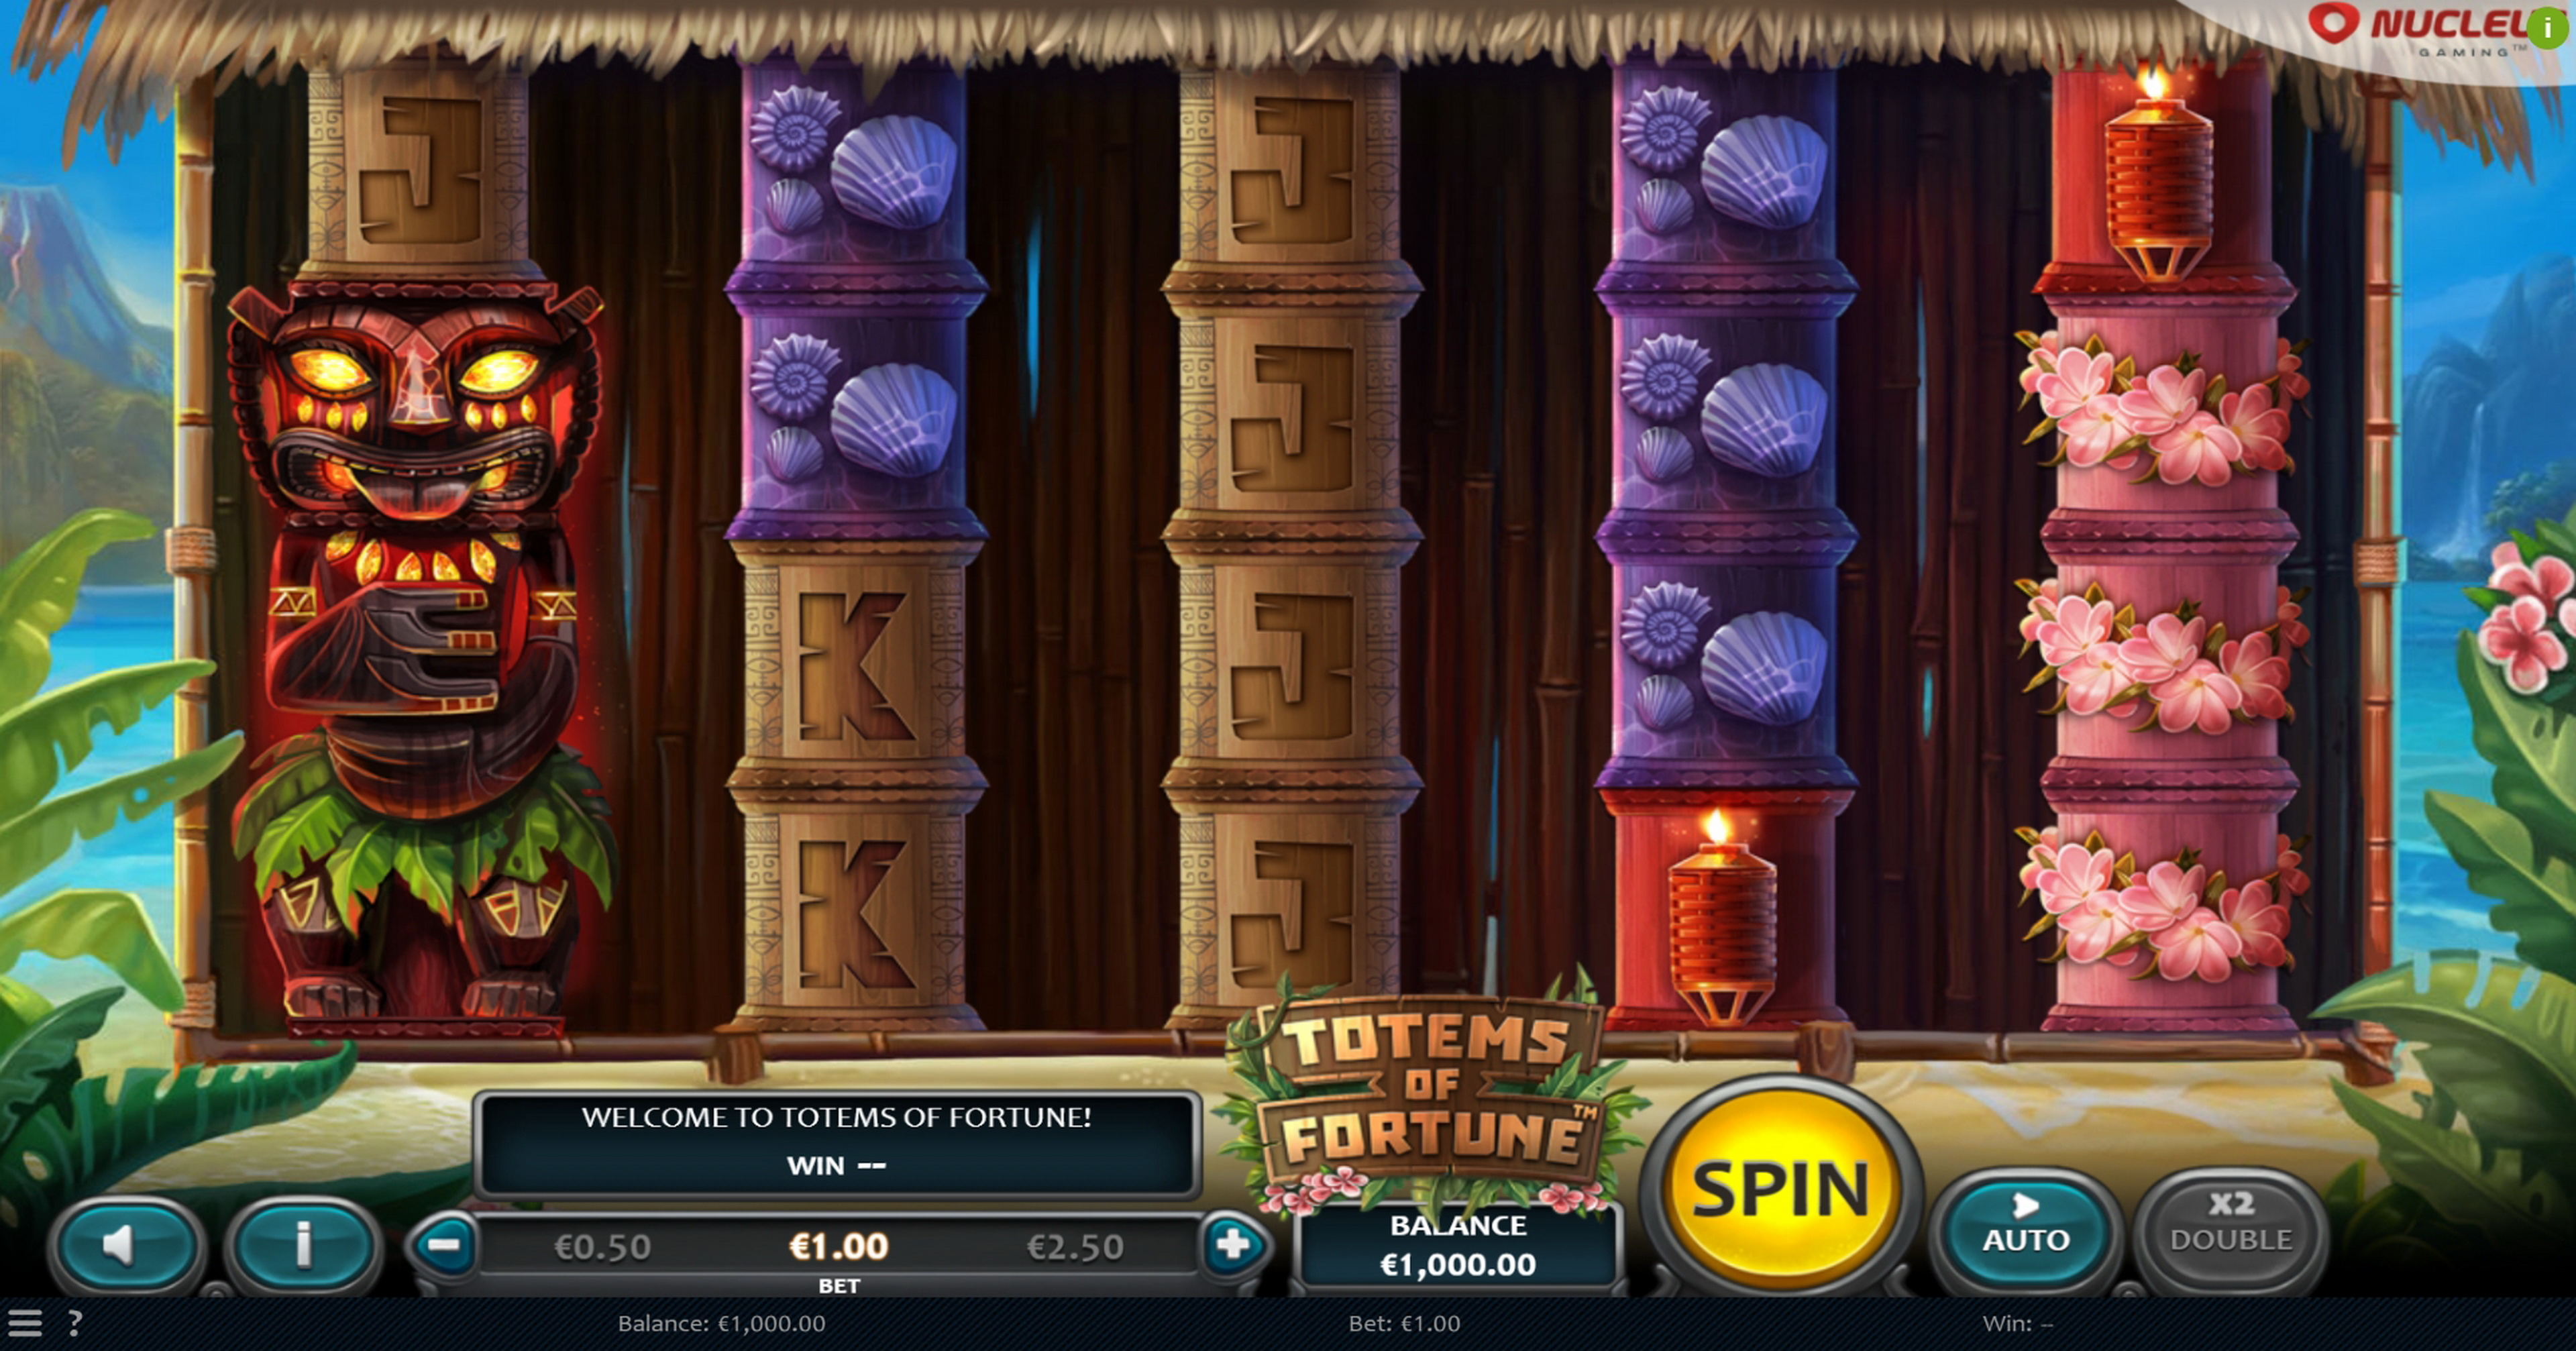 Reels in Totems of Fortune Slot Game by Nucleus Gaming